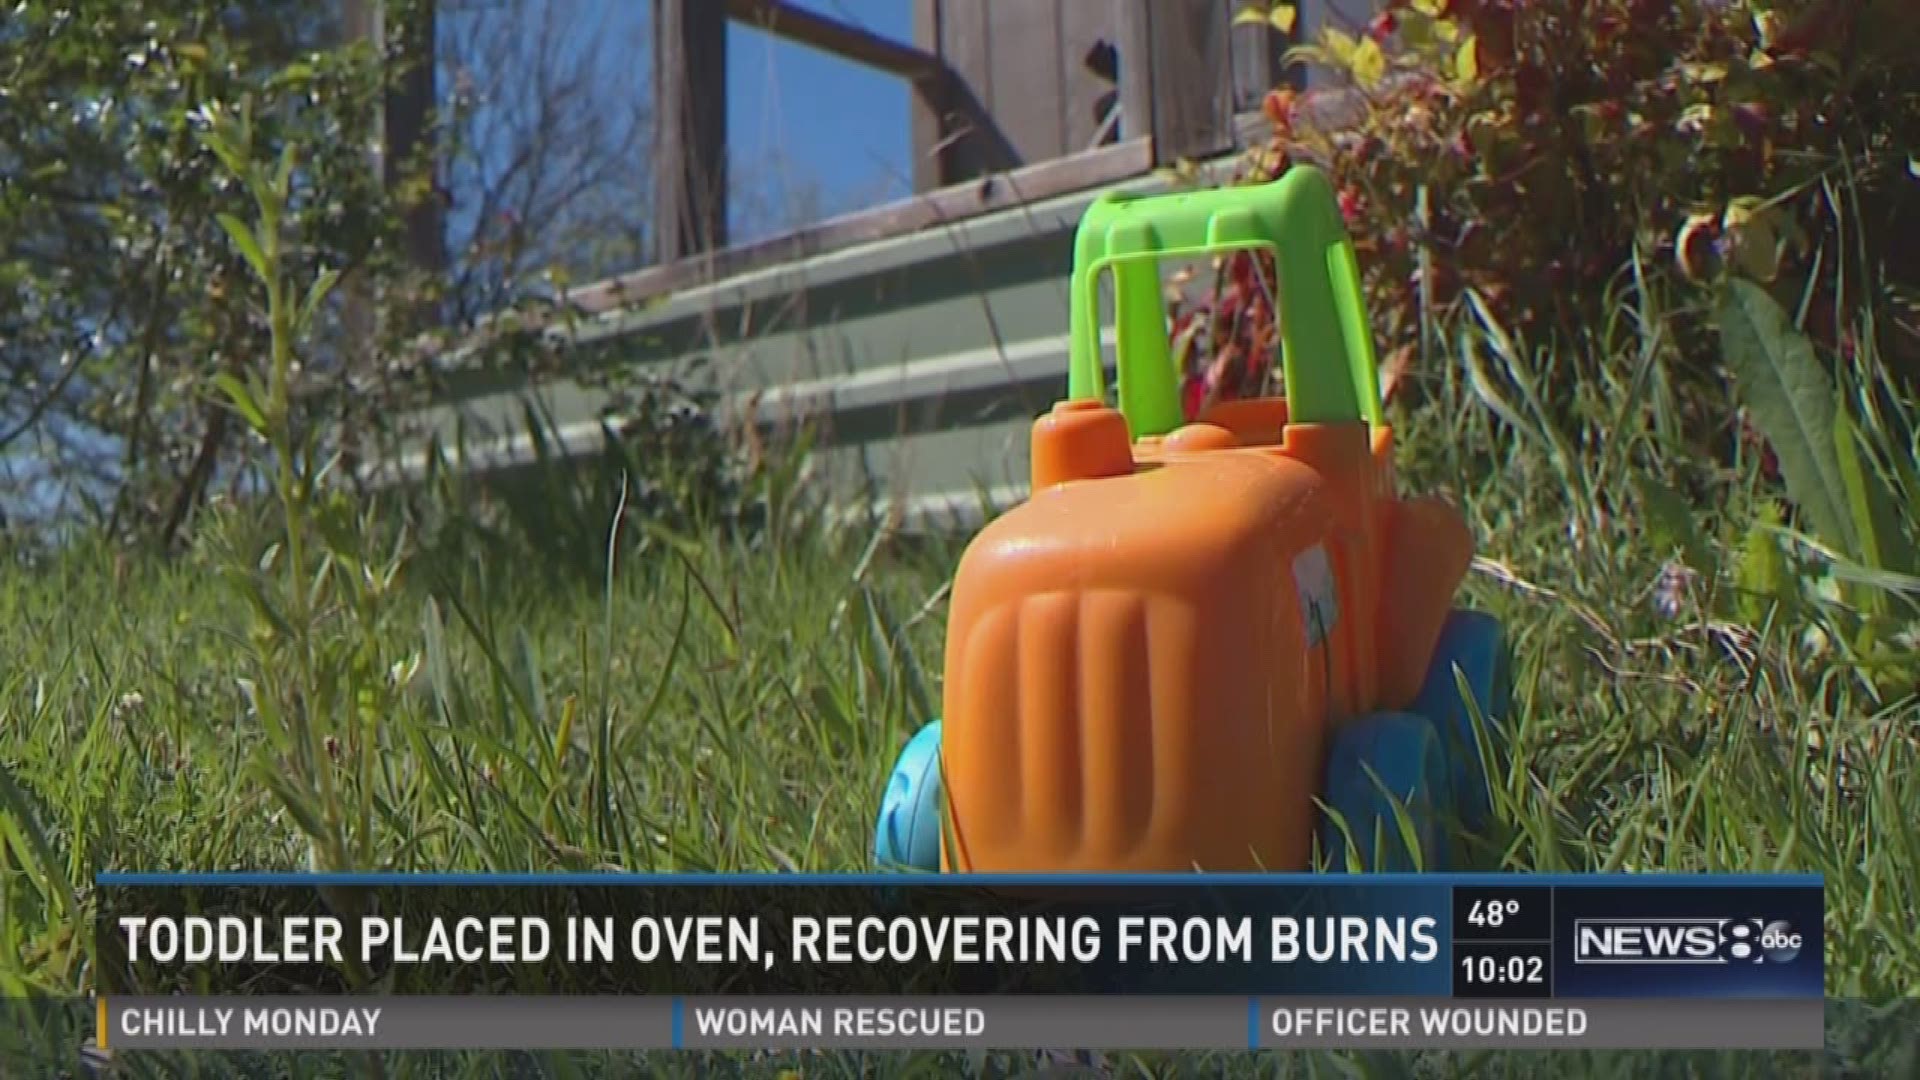 Toddler placed in oven, recovering from burns